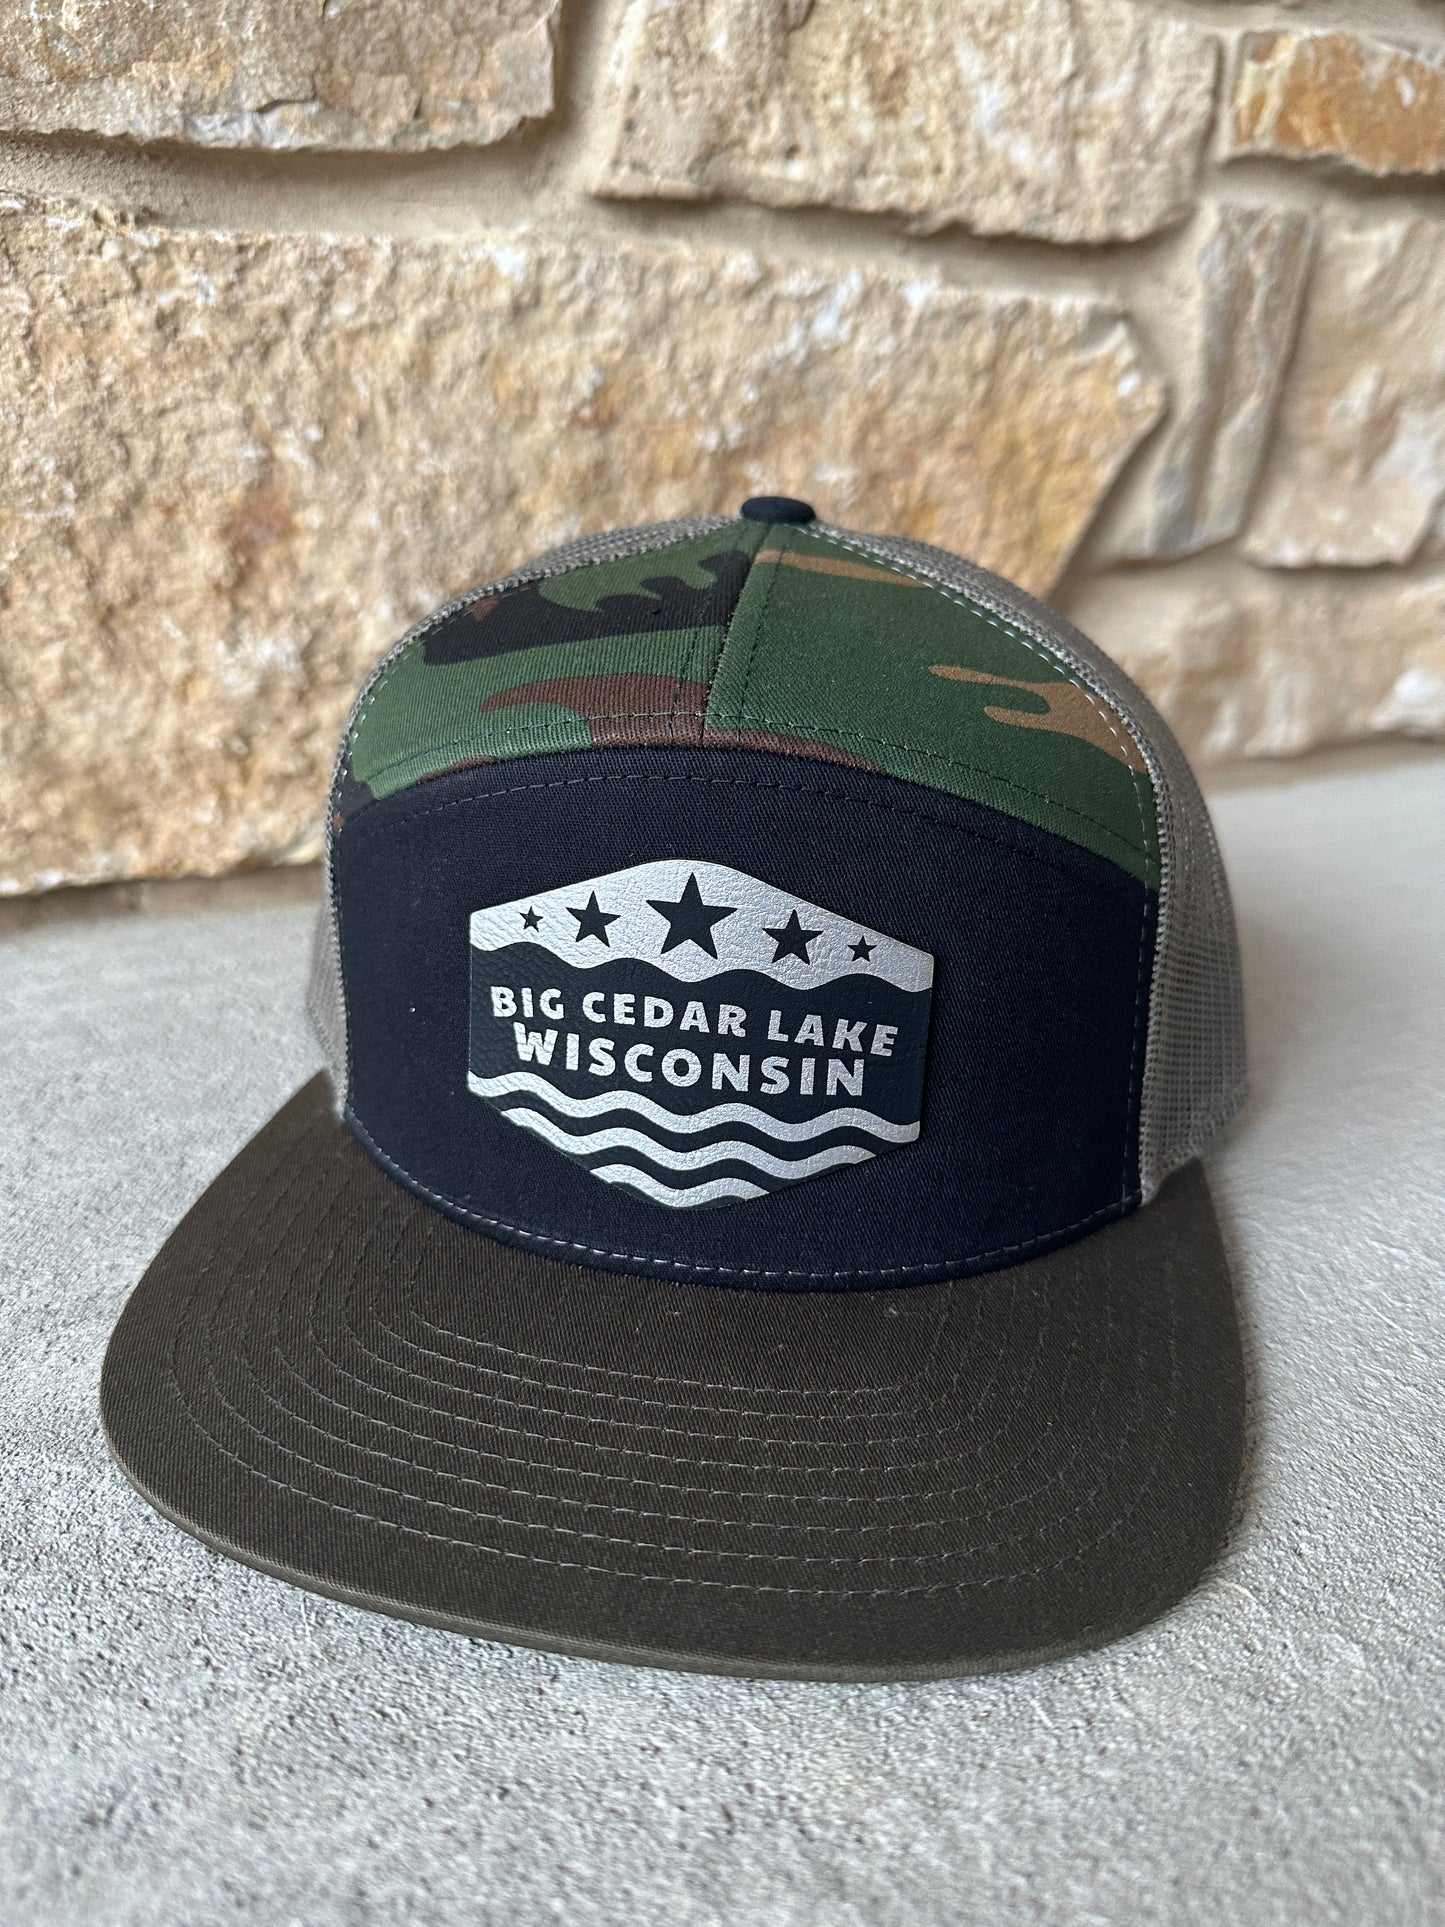 The Star Spangled BCL 7 Panel Trucker